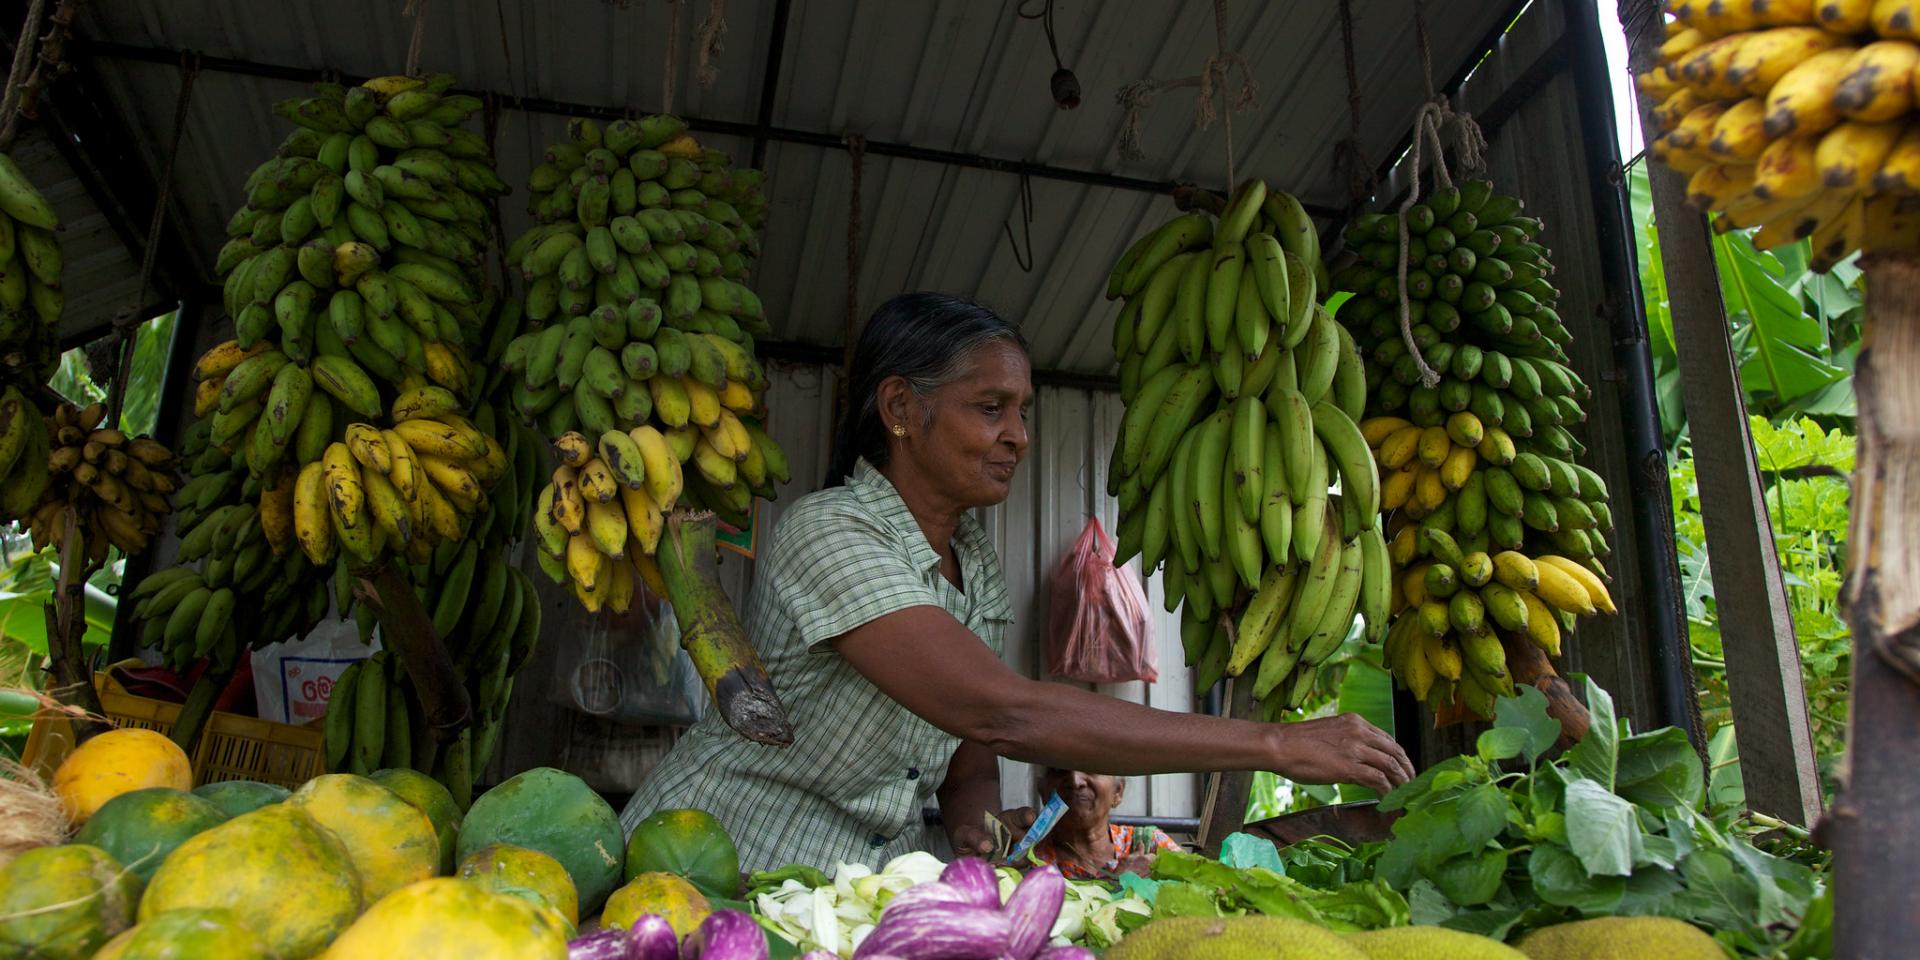 Selling fresh vegetables in a market